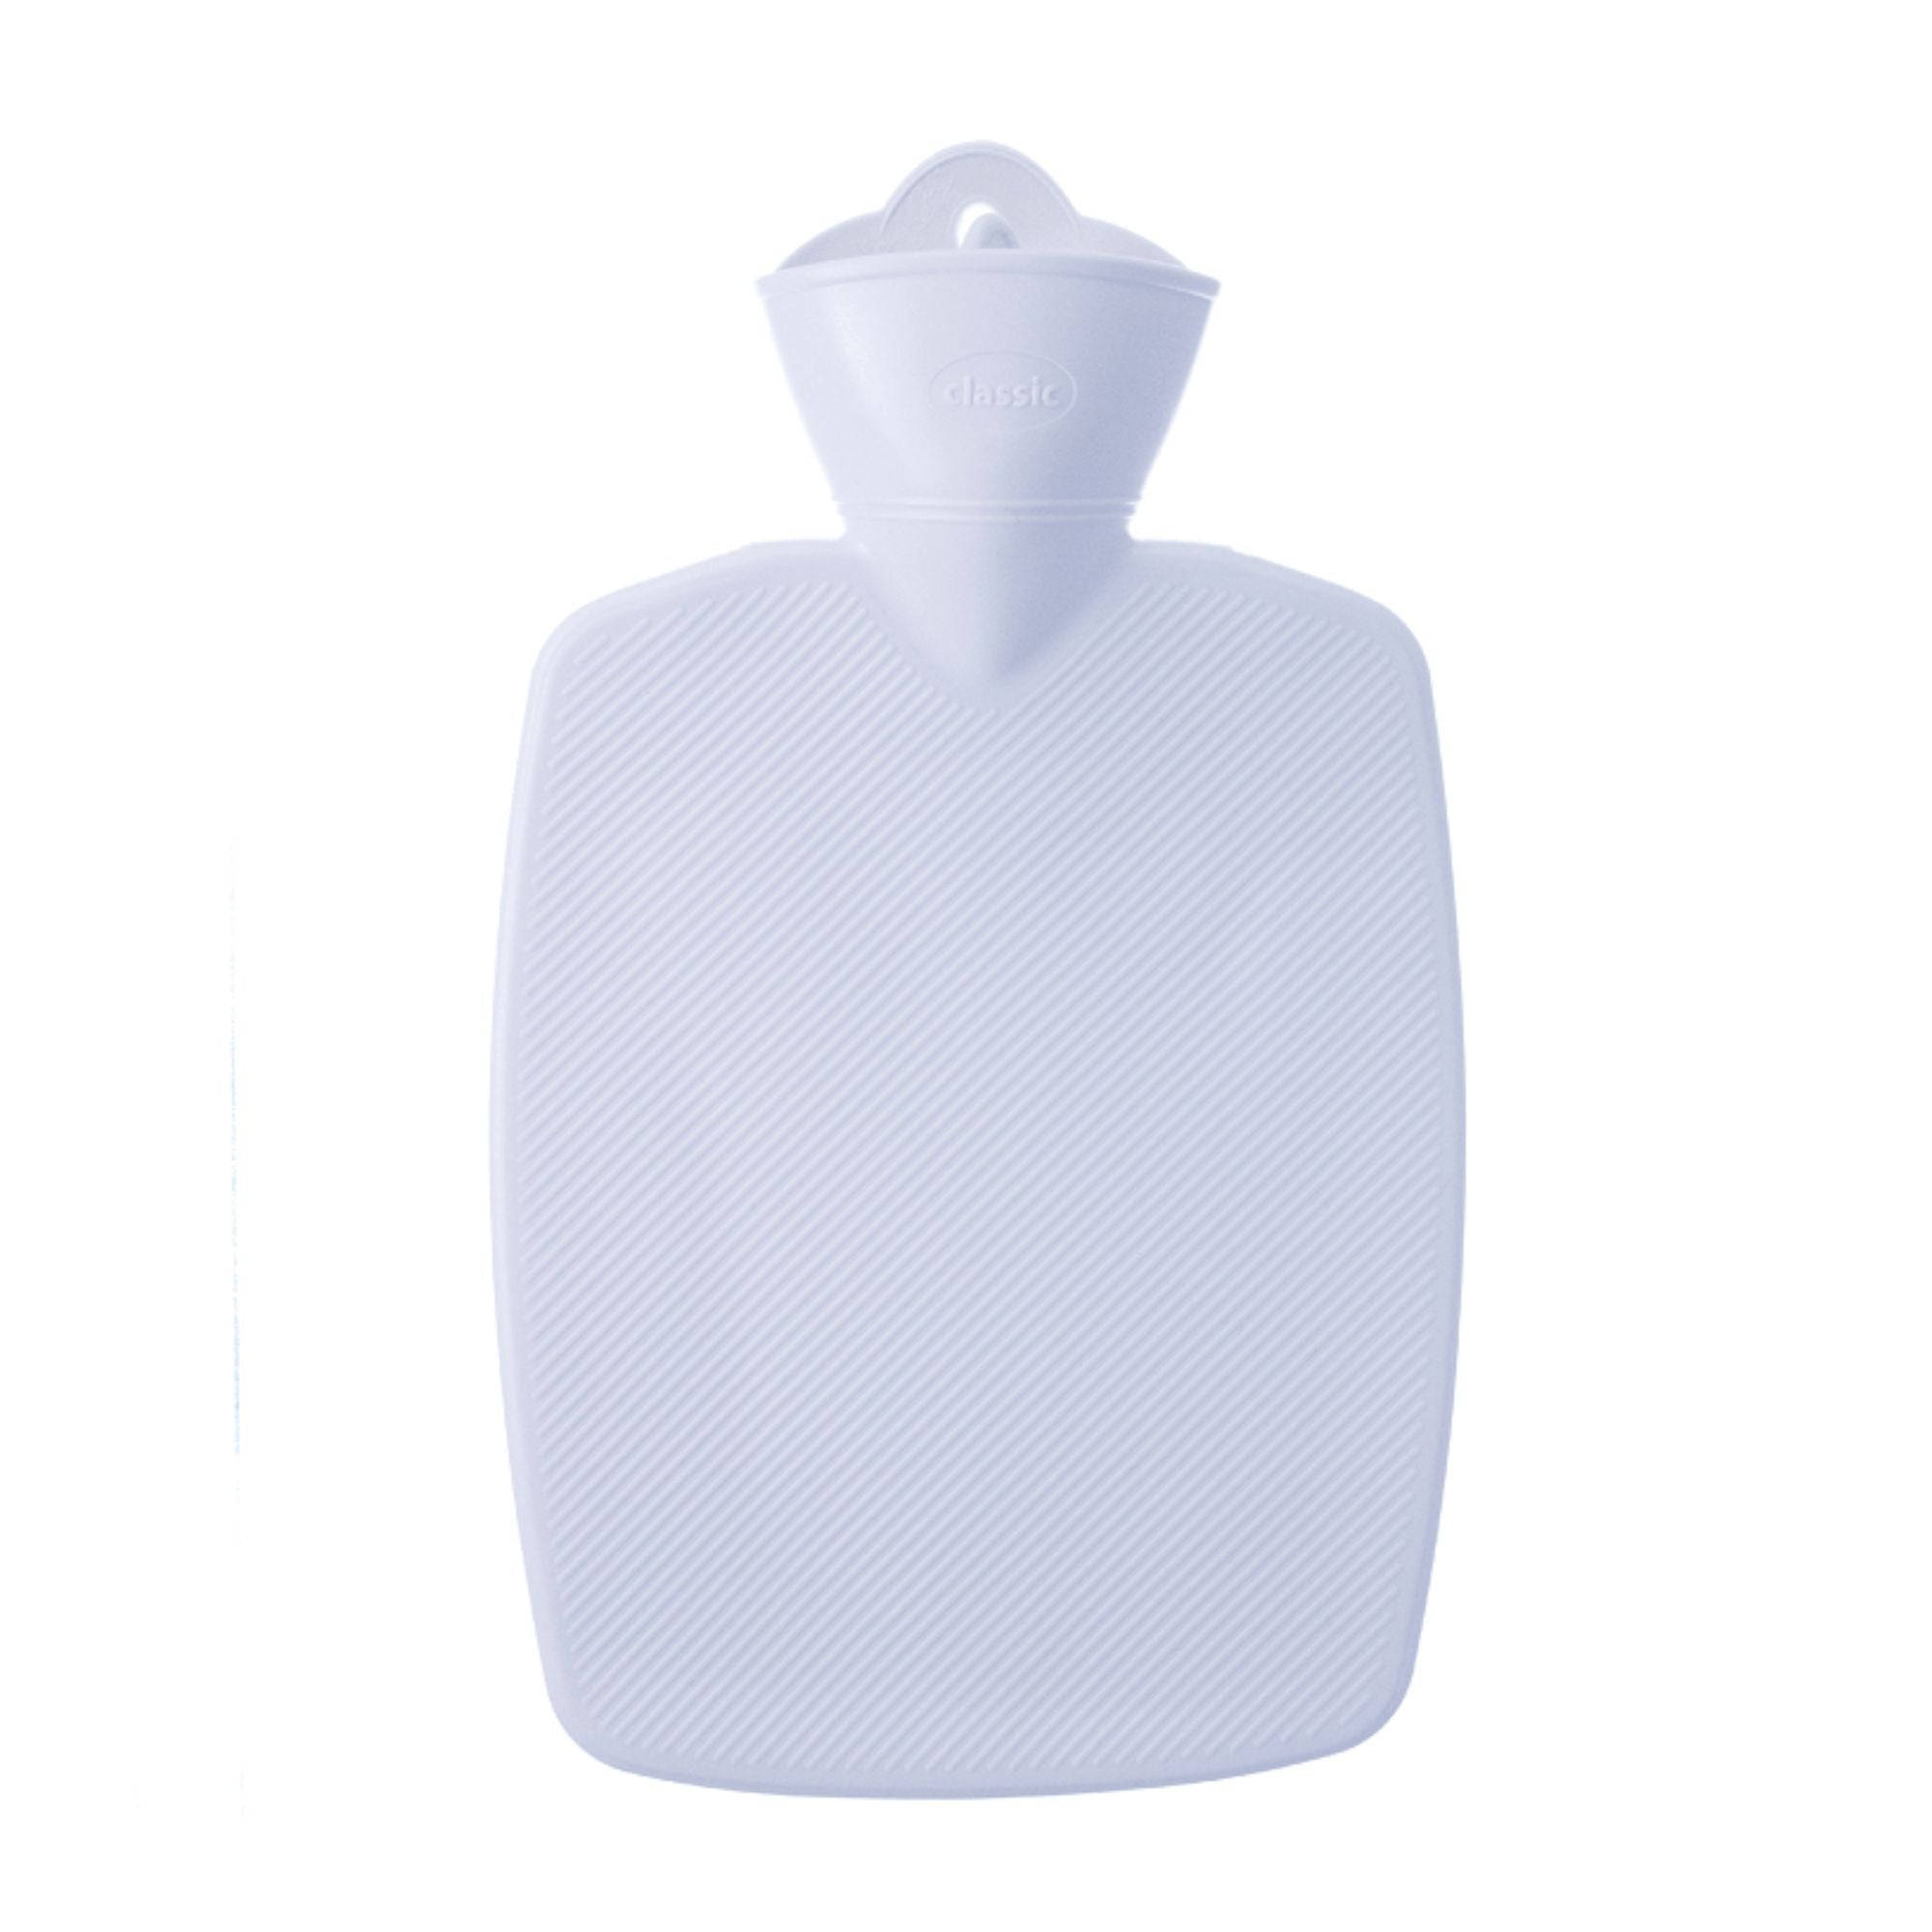 1.8 Litre Classic White Hot Water Bottle (rubberless)